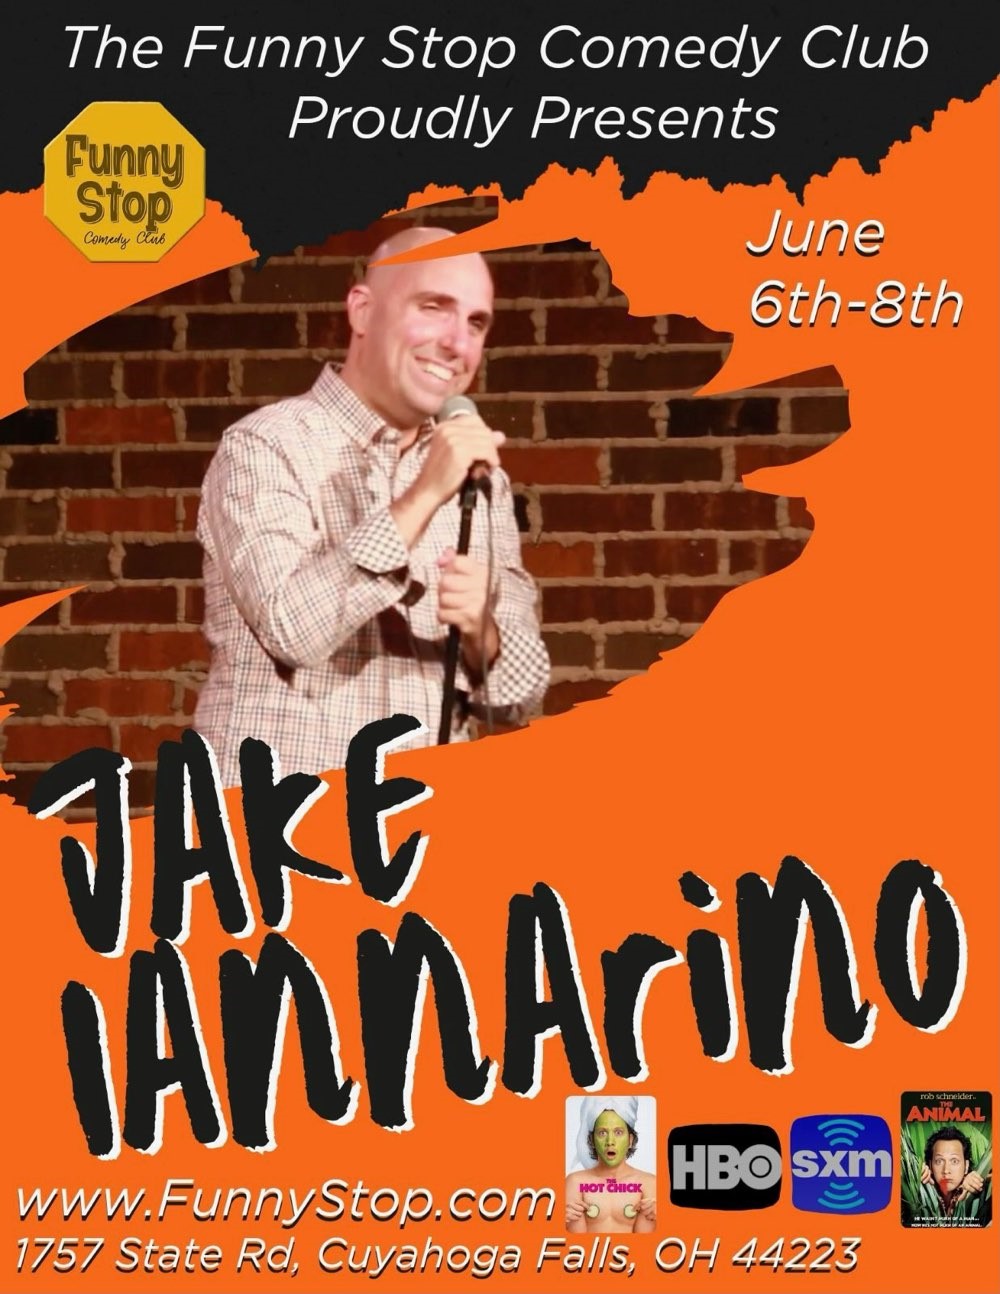 Jake Iannarino - Fri. 7:30PM Show Funny Stop Comedy Club on Jun 07, 19:30@Funny Stop Comedy Club - Buy tickets and Get information on Funny Stop funnystop.online